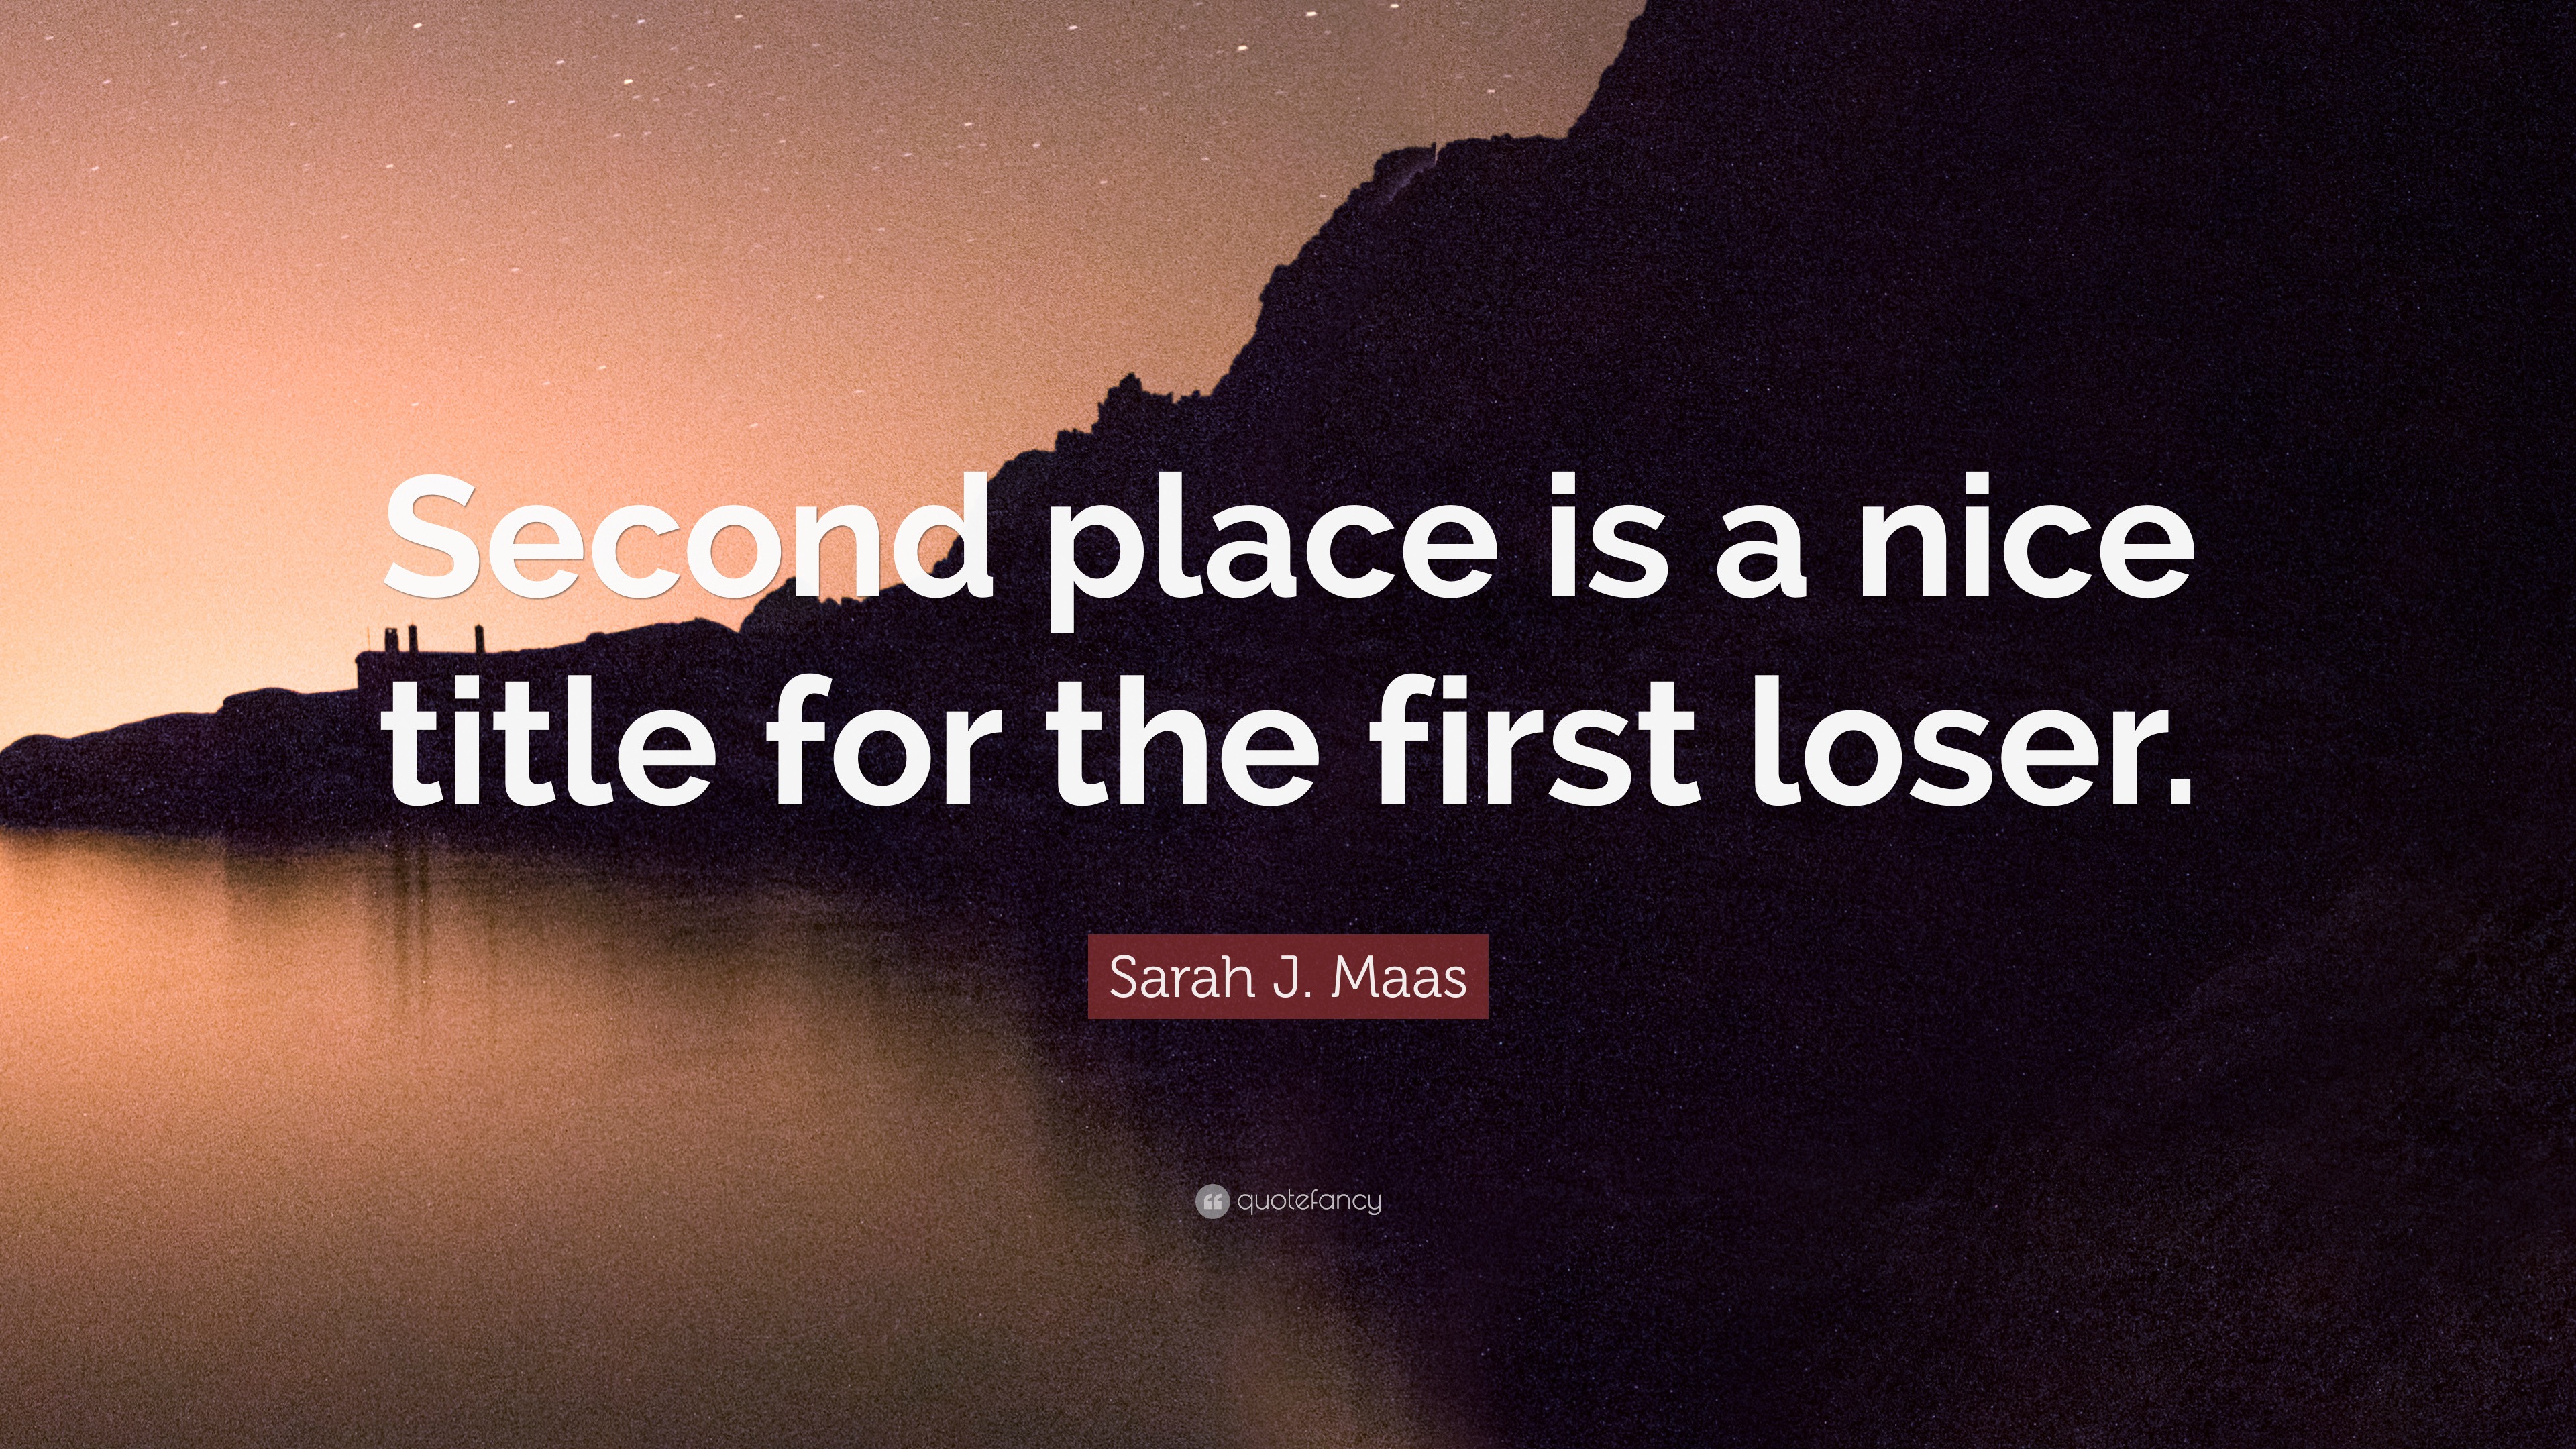 Sarah J Maas Quote Second Place Is A Nice Title For The First Loser